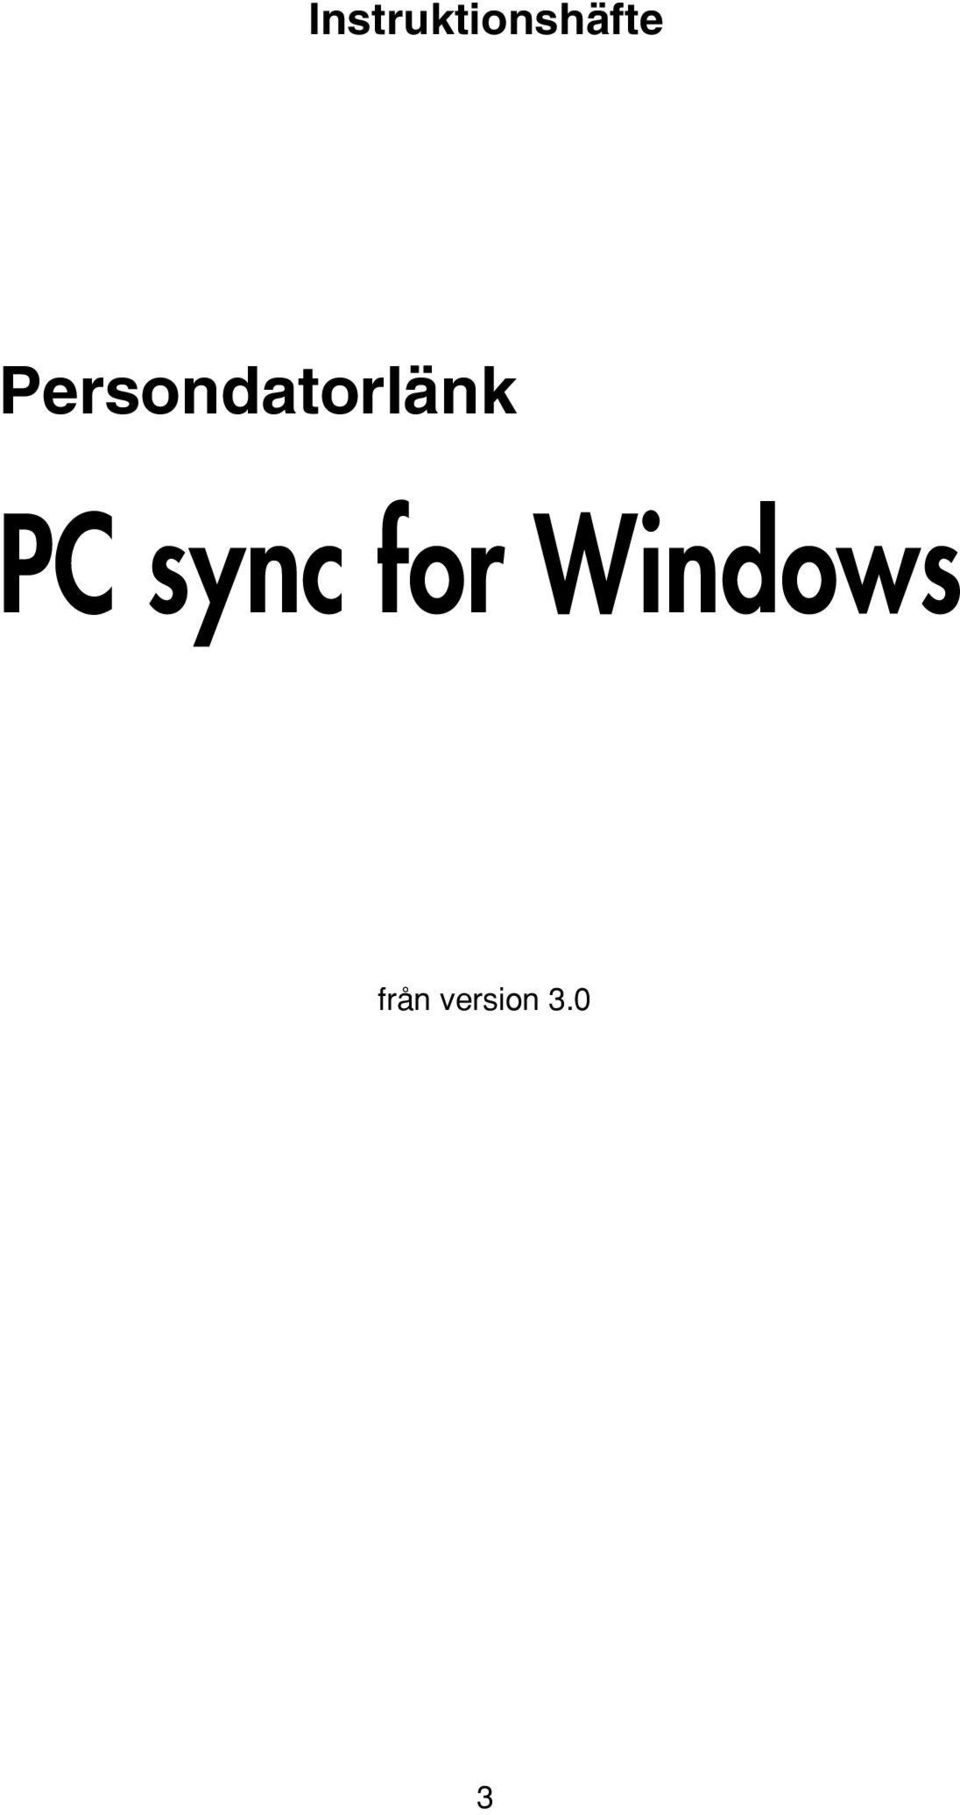 PC sync for